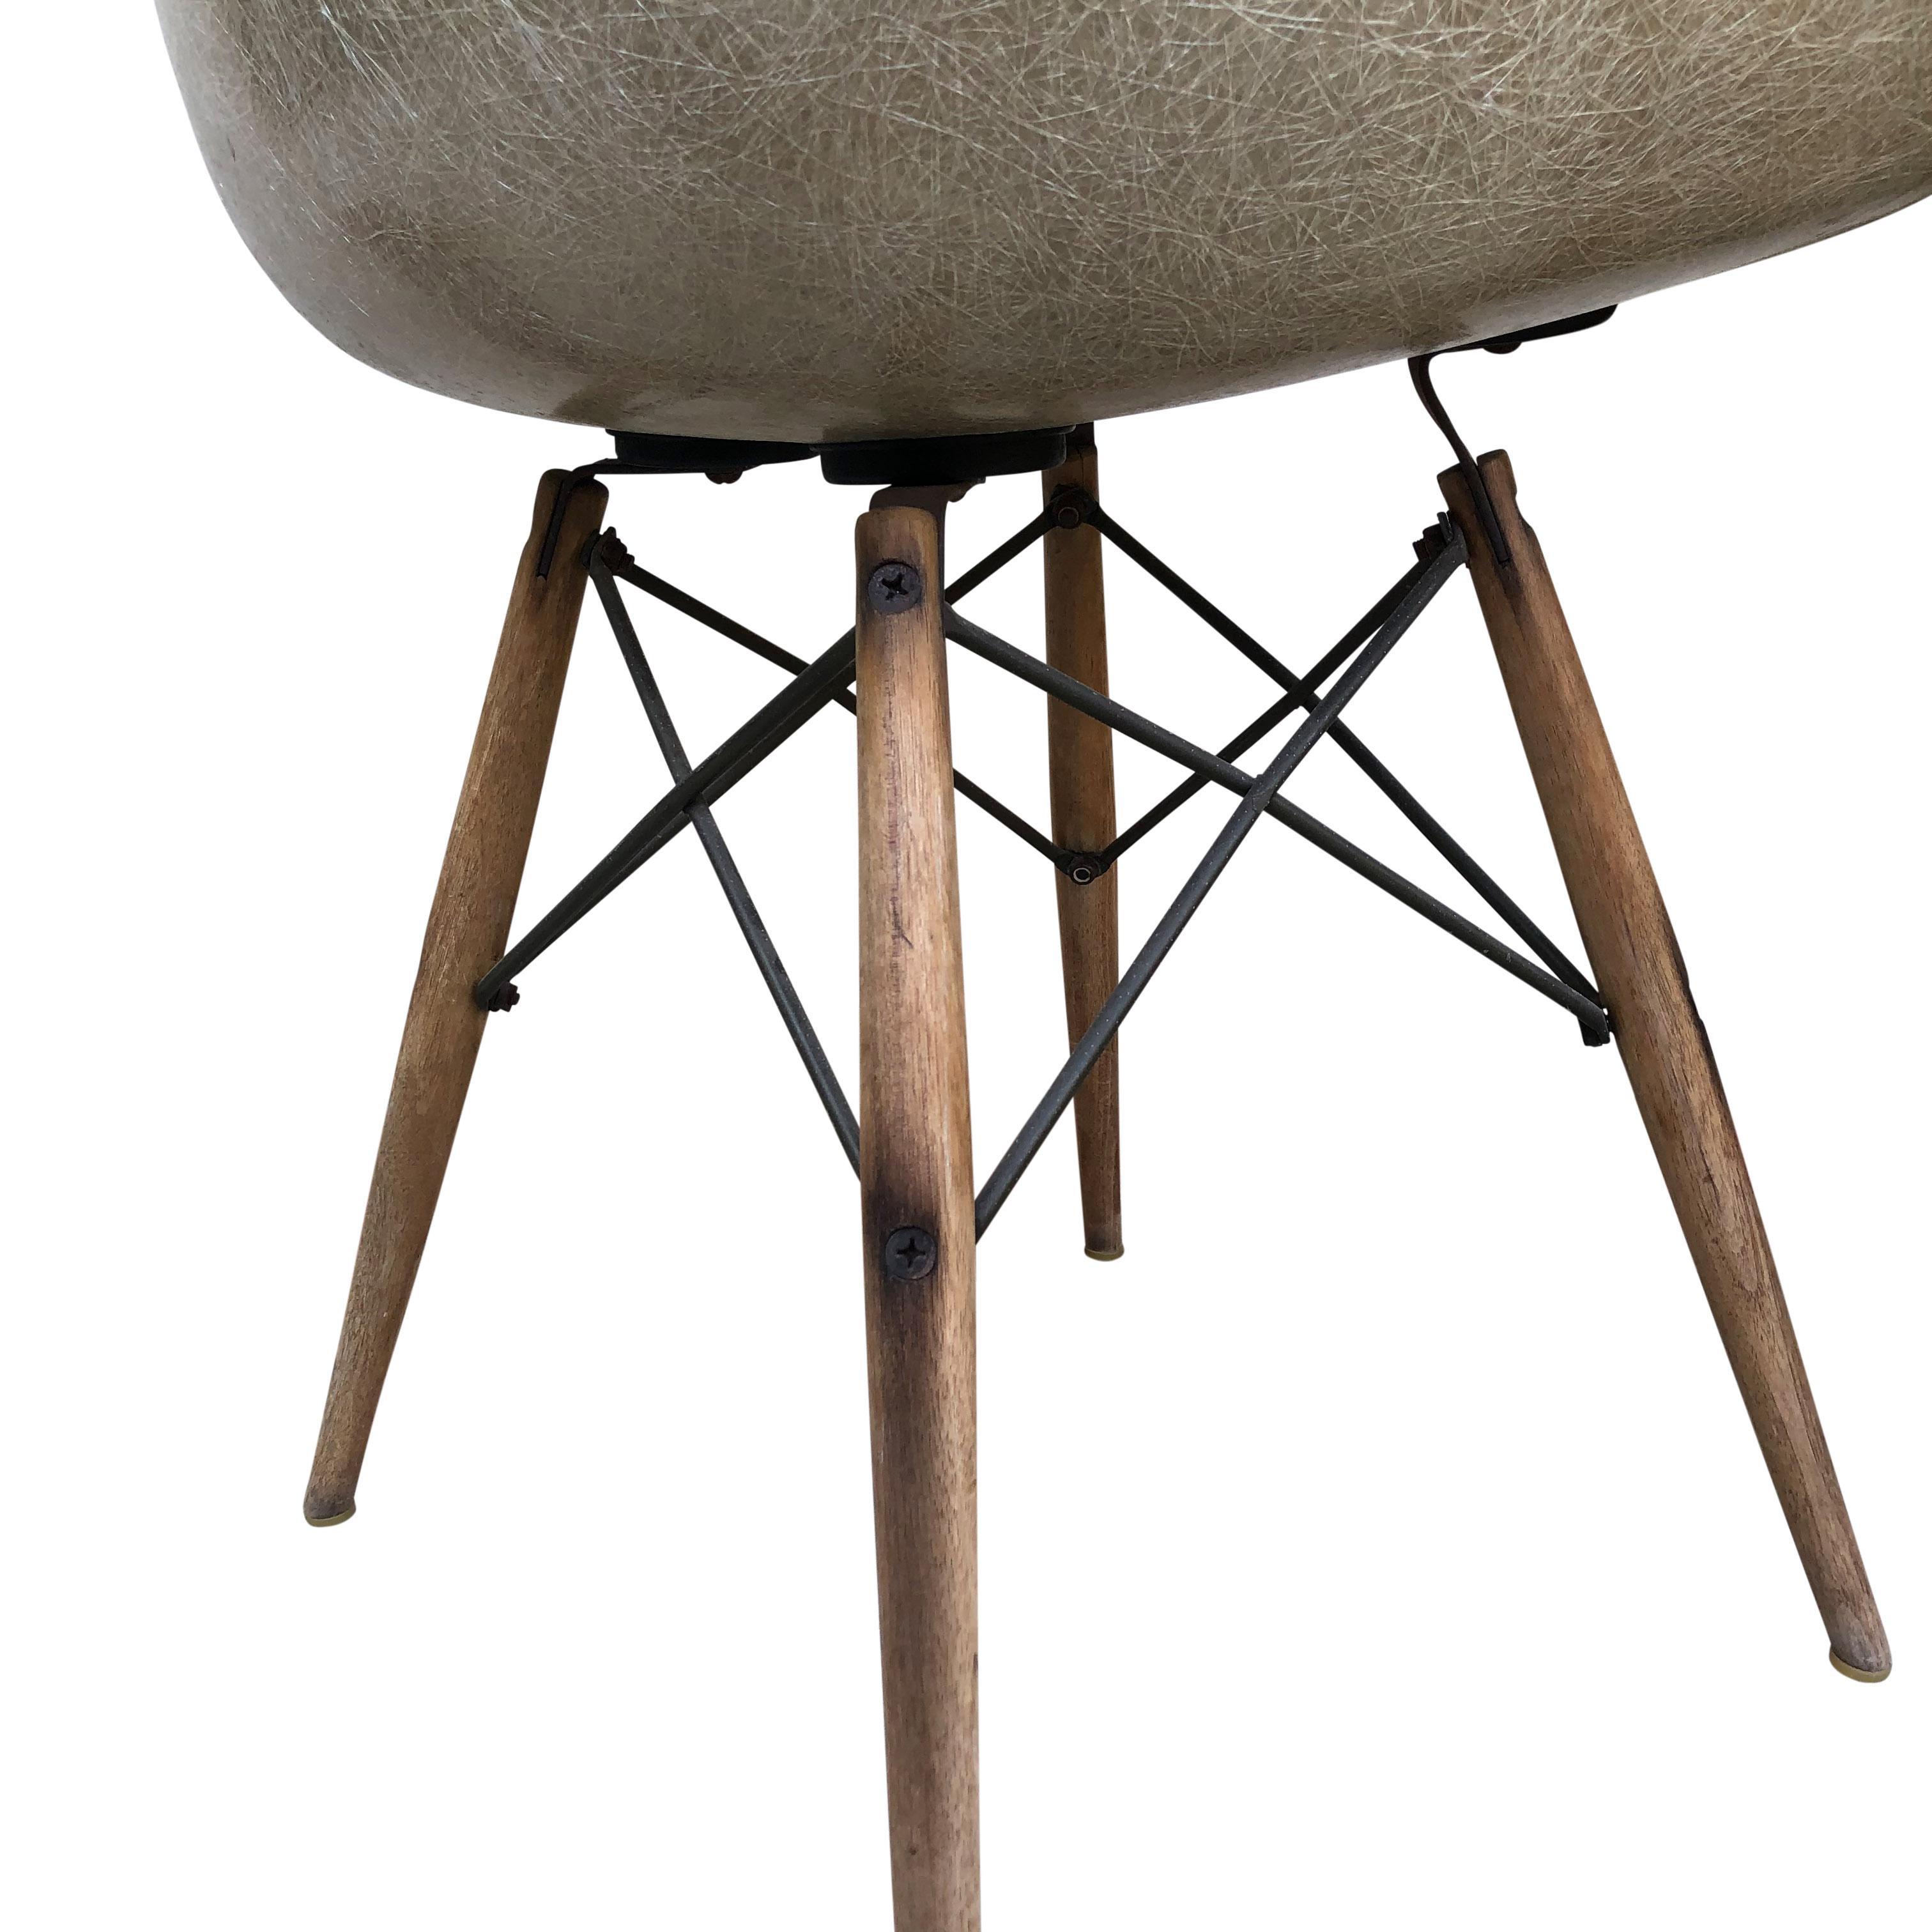 Mid-20th Century Eames for Herman Miller Zenith Daw Dowel Base Chair, for Mid-Century Collectors